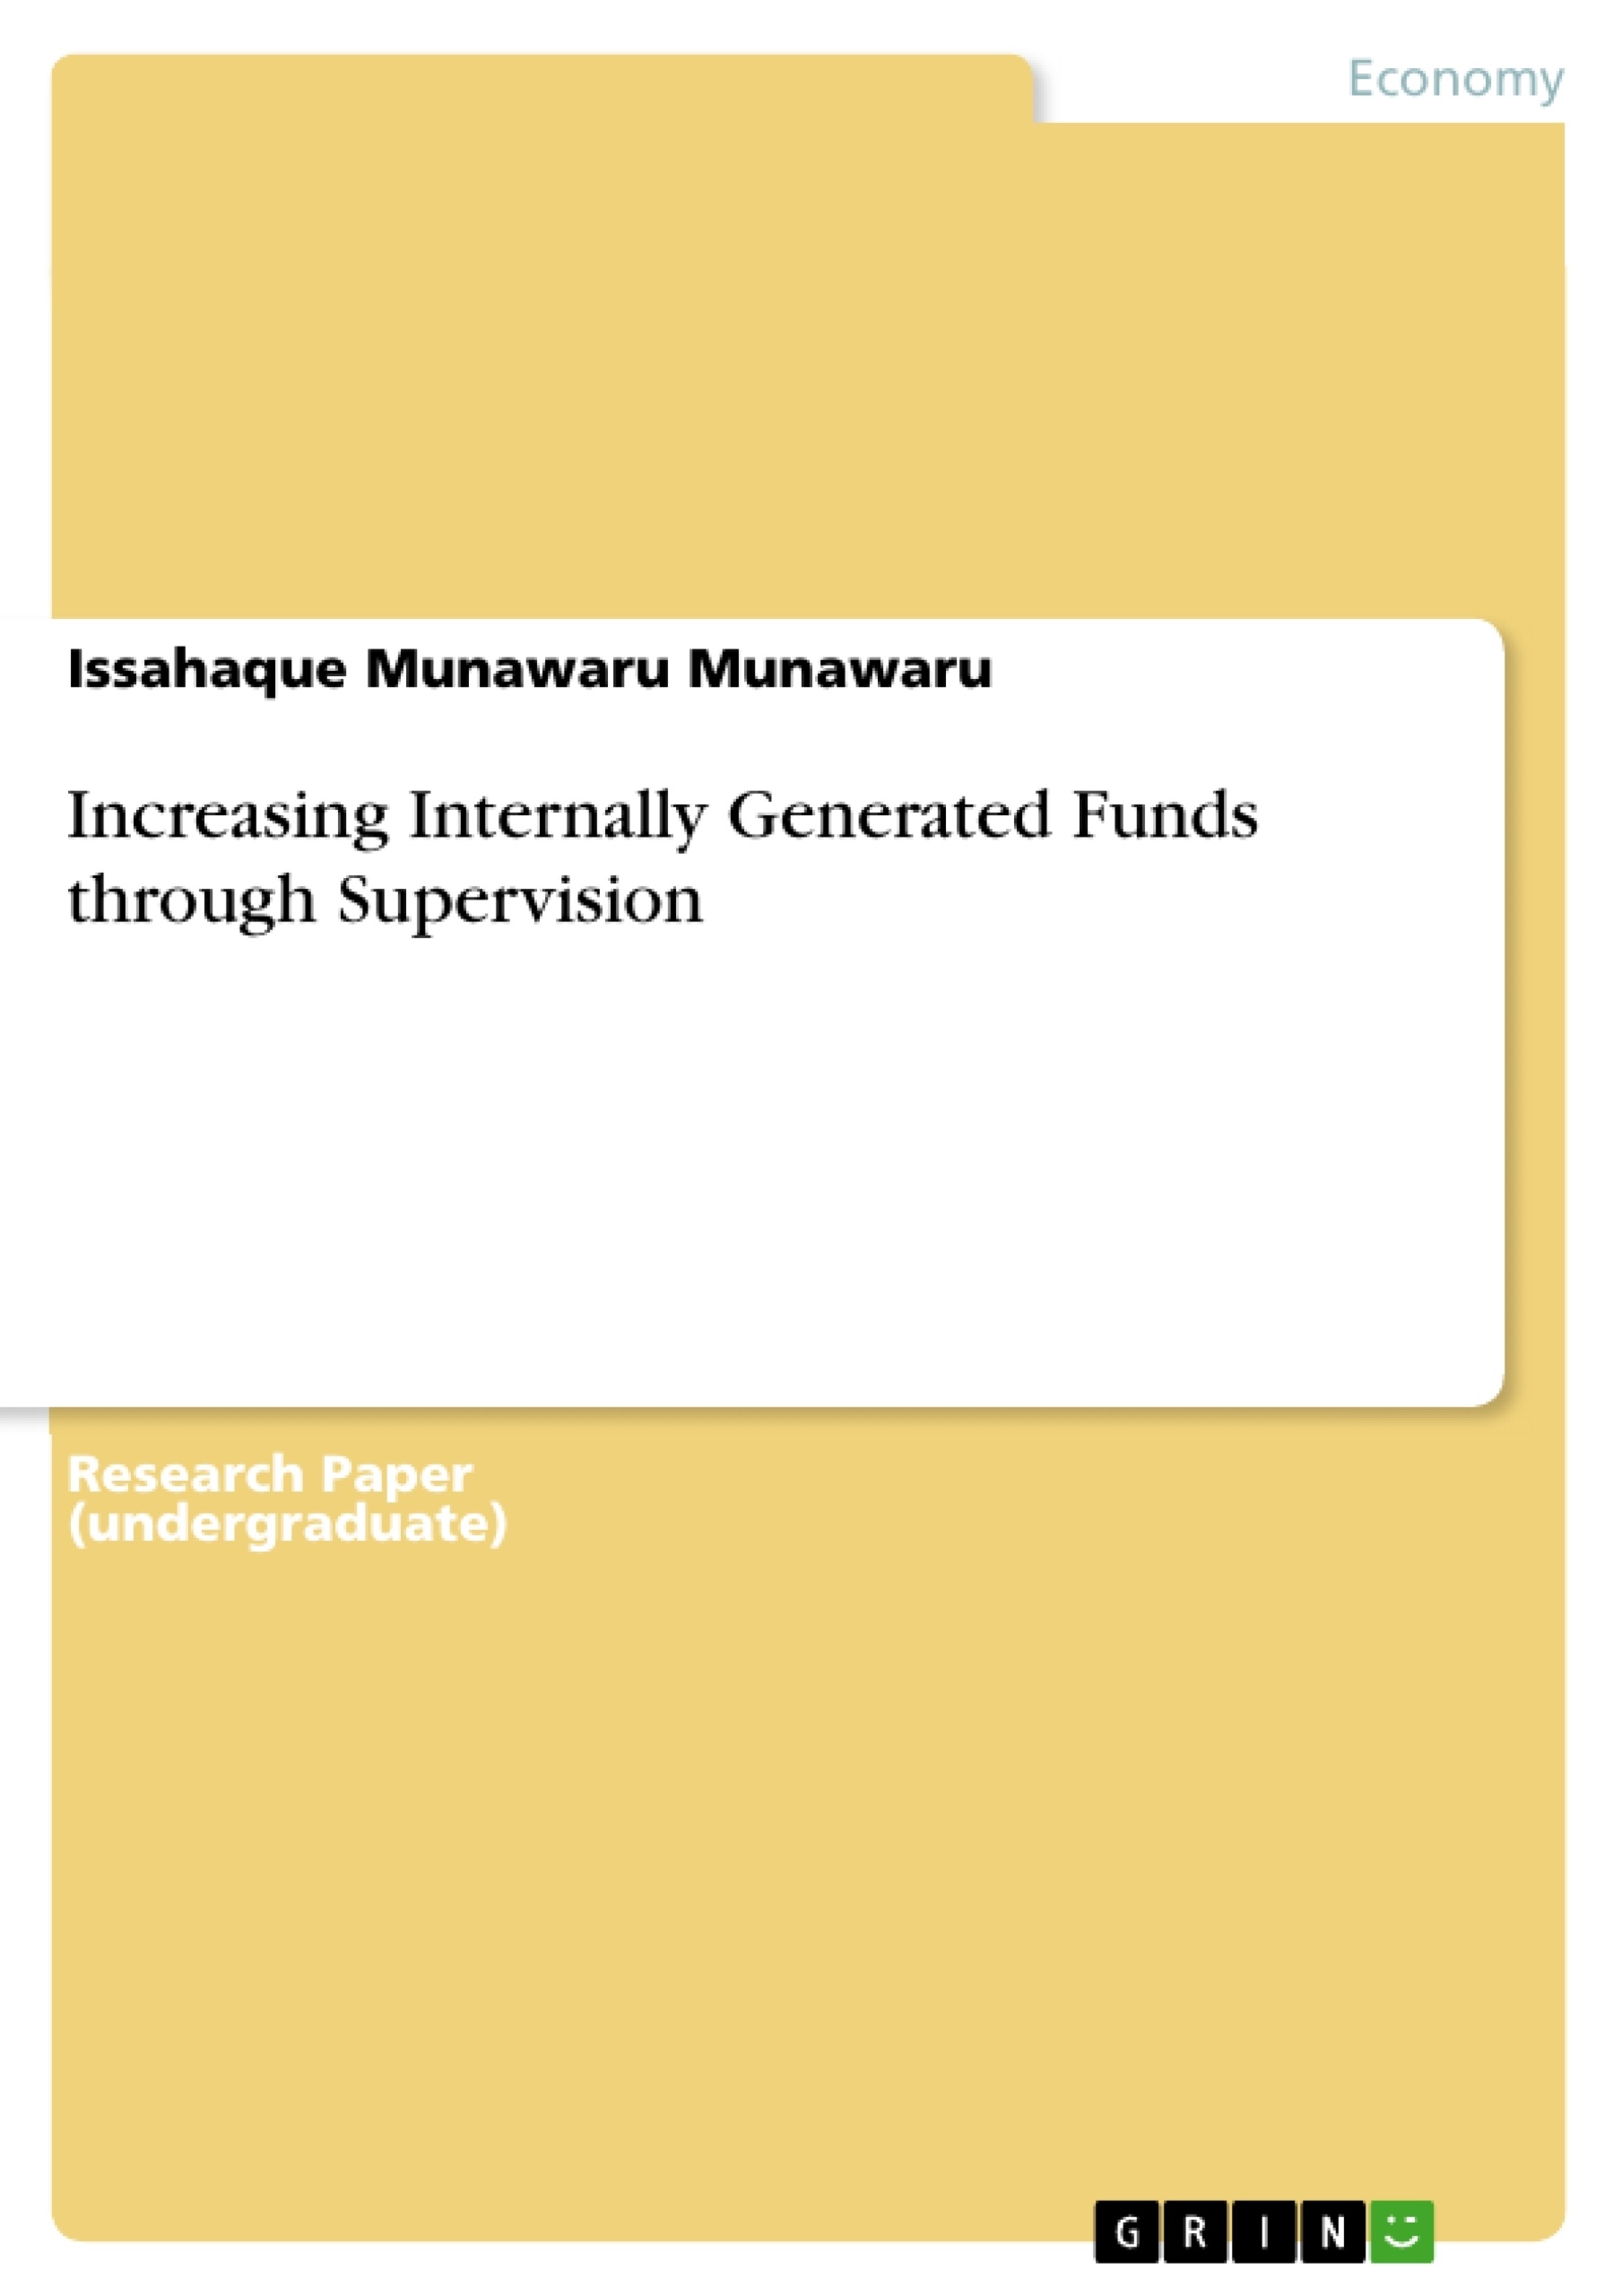 Title: Increasing Internally Generated Funds through Supervision